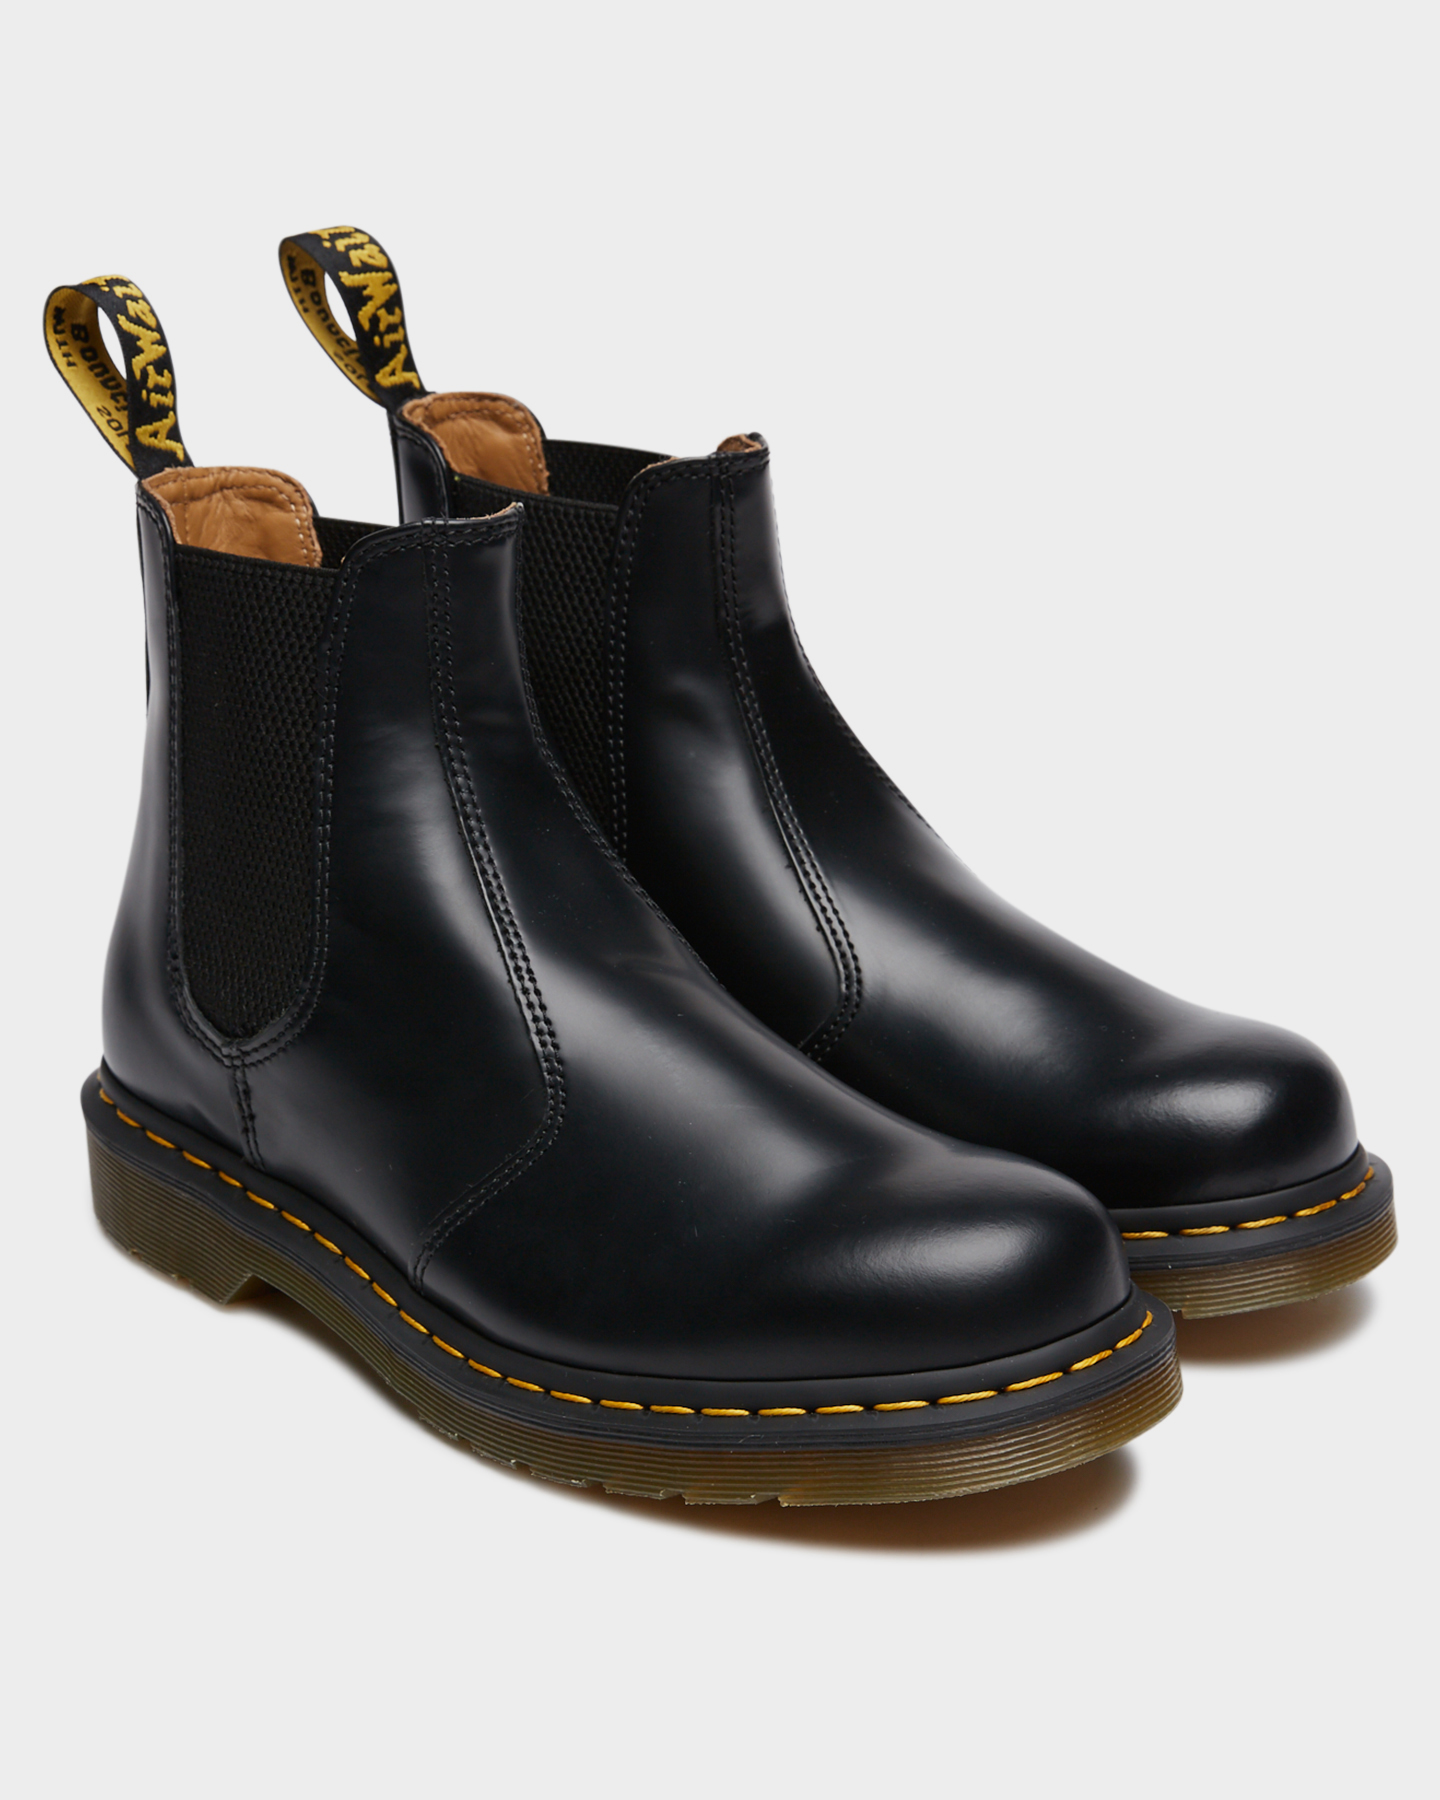 Martens 2976 Chelsea Boot - Smooth SurfStitch